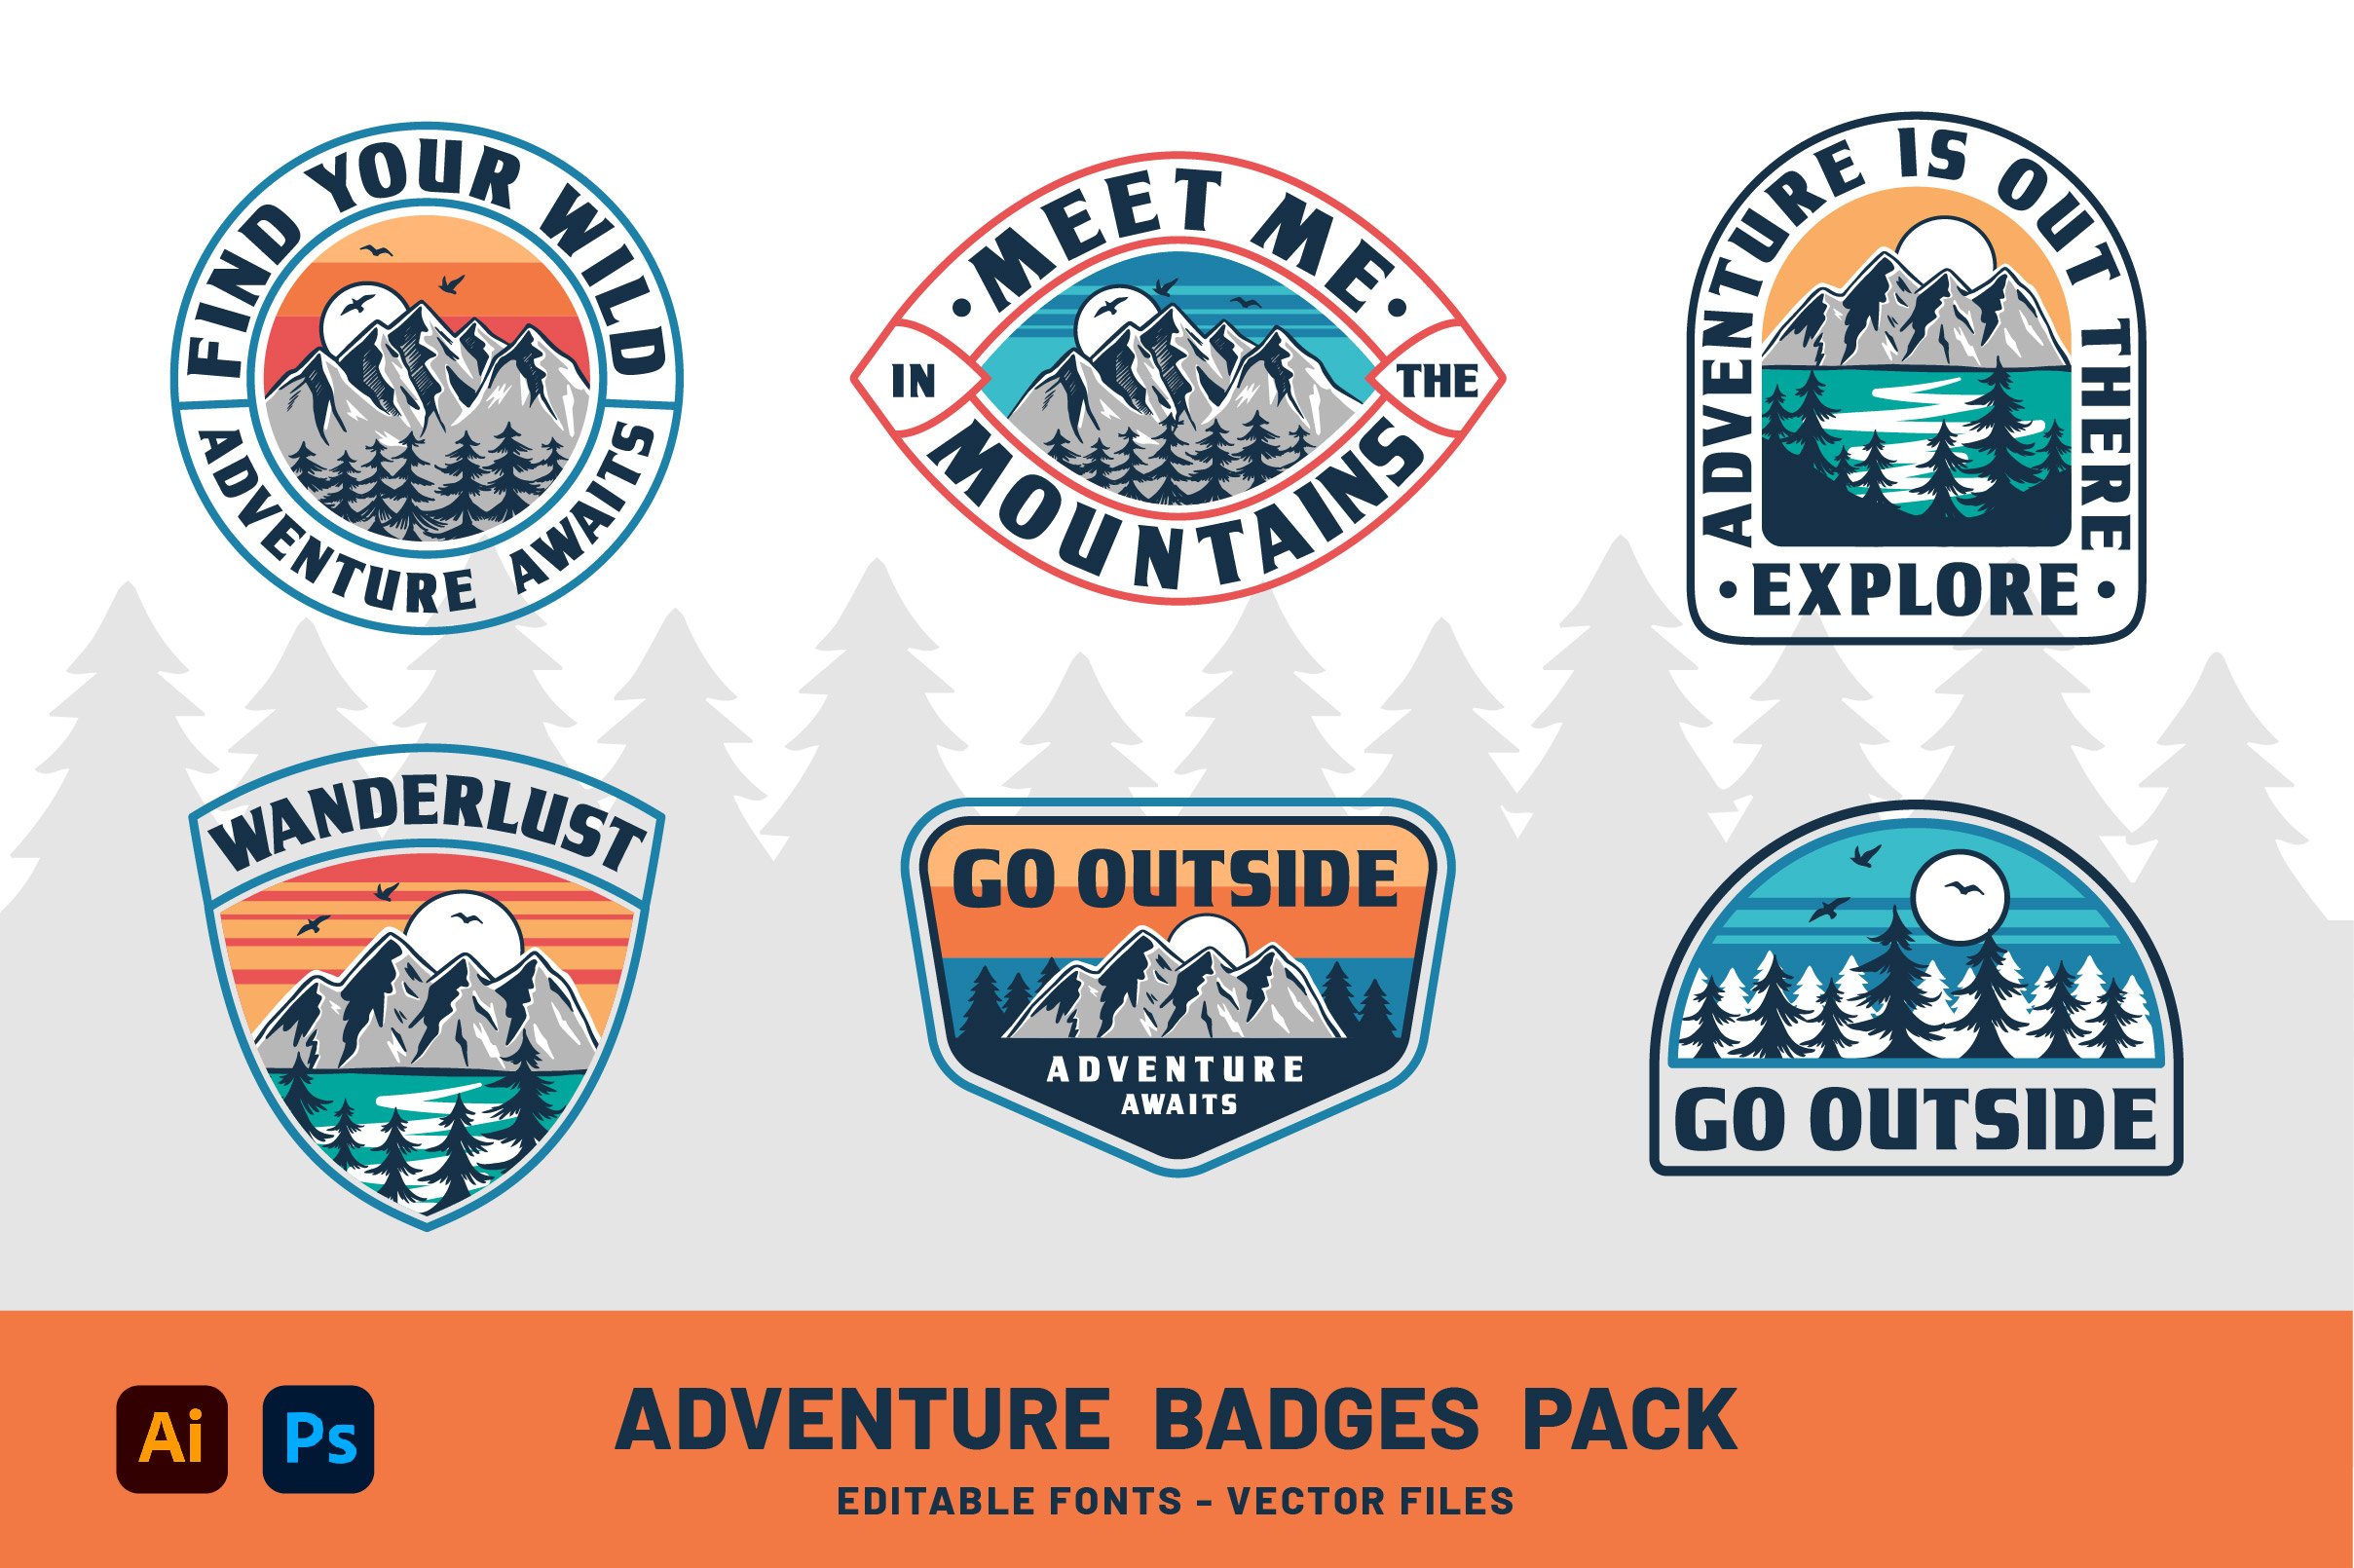 Adventure Badges Pack cover image.